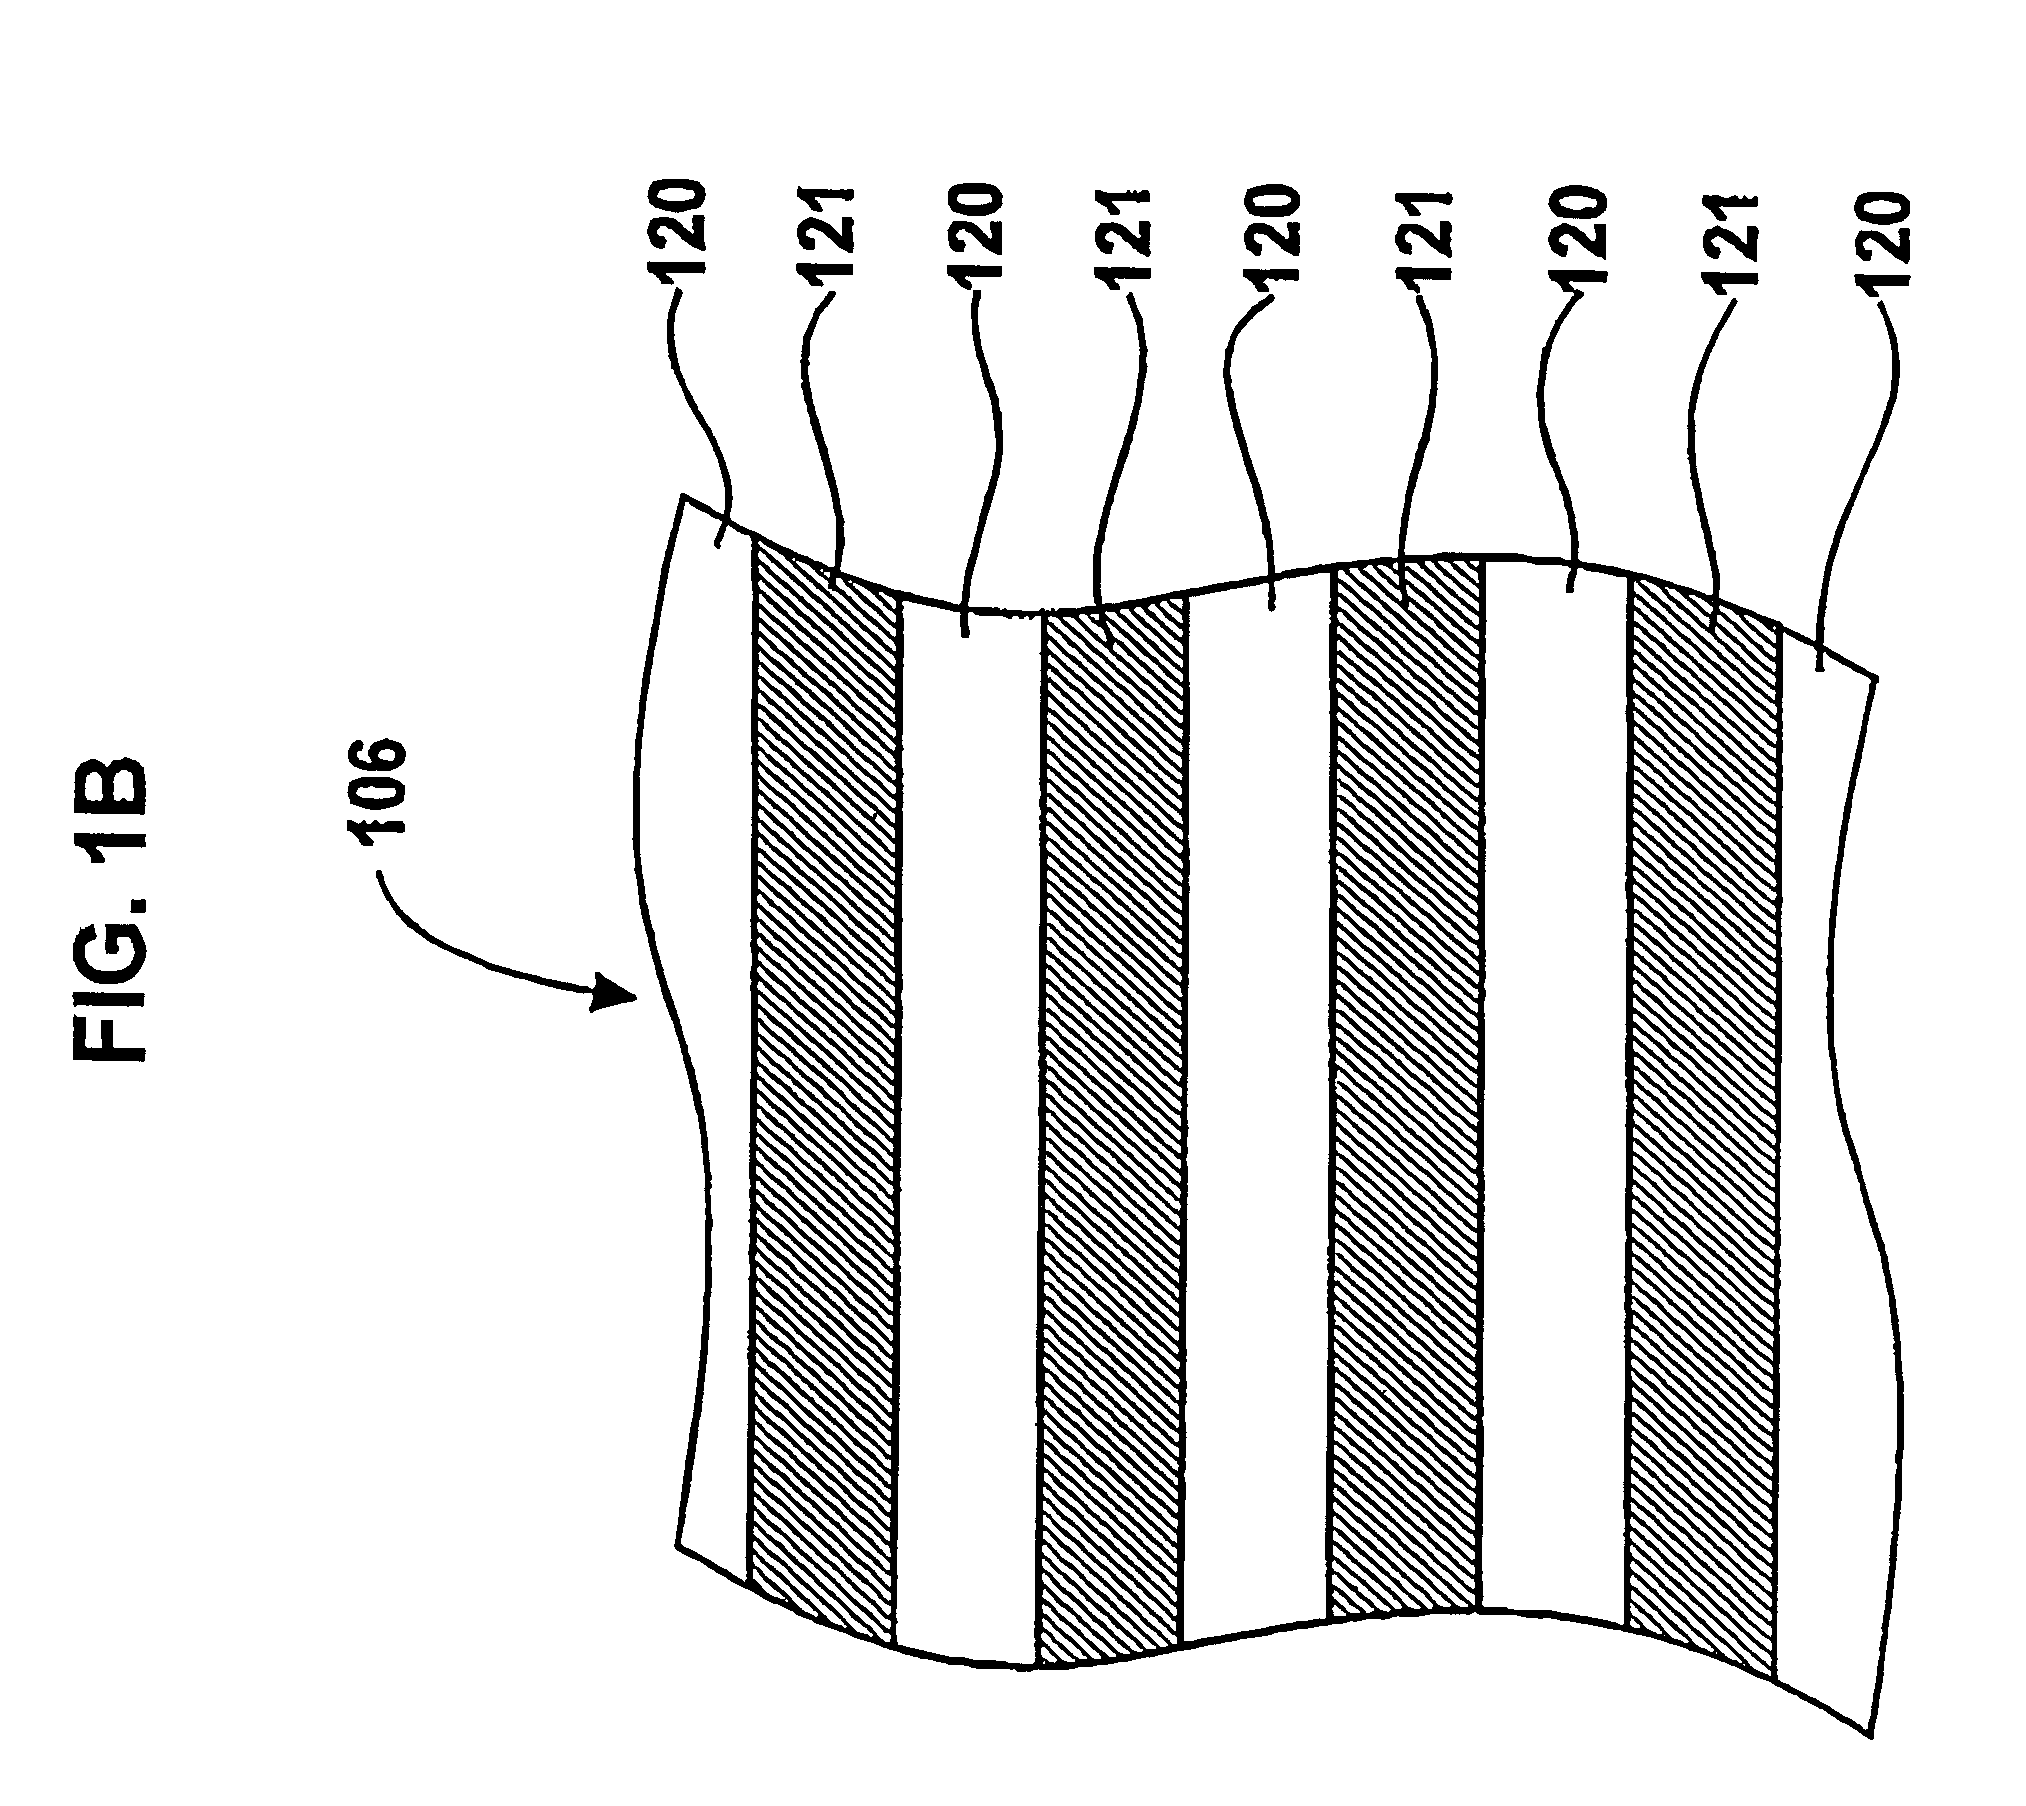 Nitride compound semiconductor light emitting device and method for producing the same